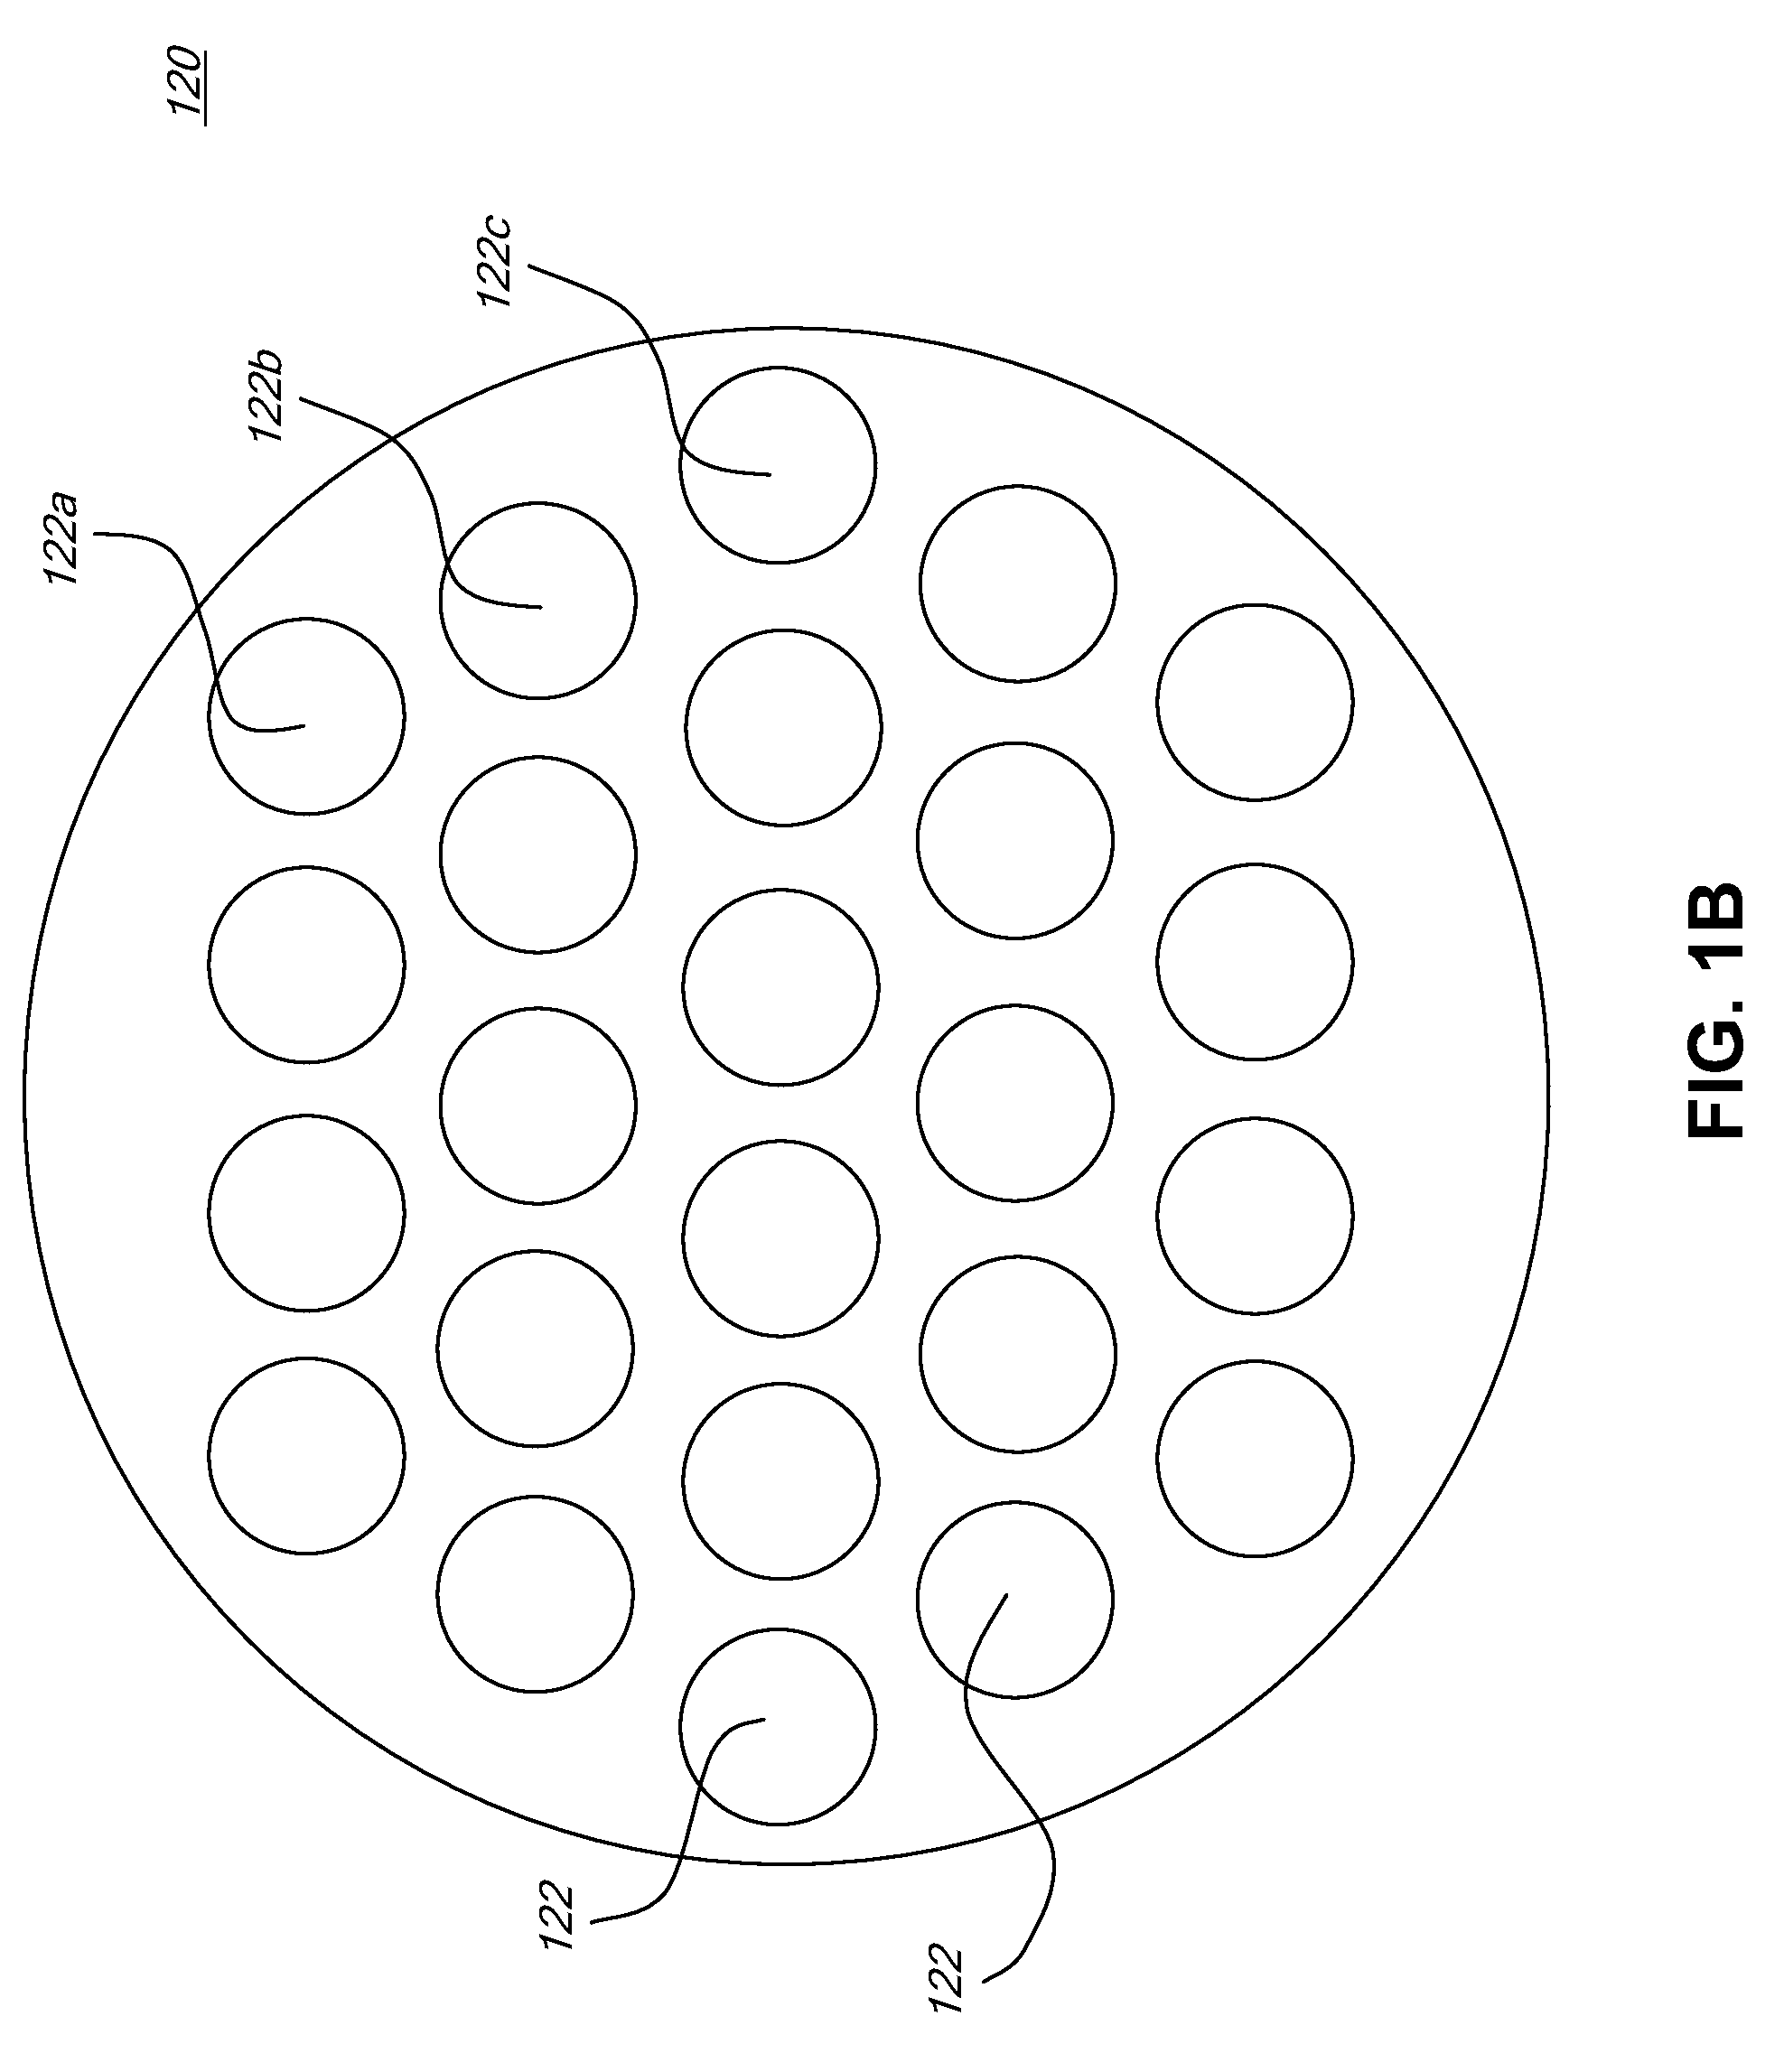 Maintaining flow rate of a fluid